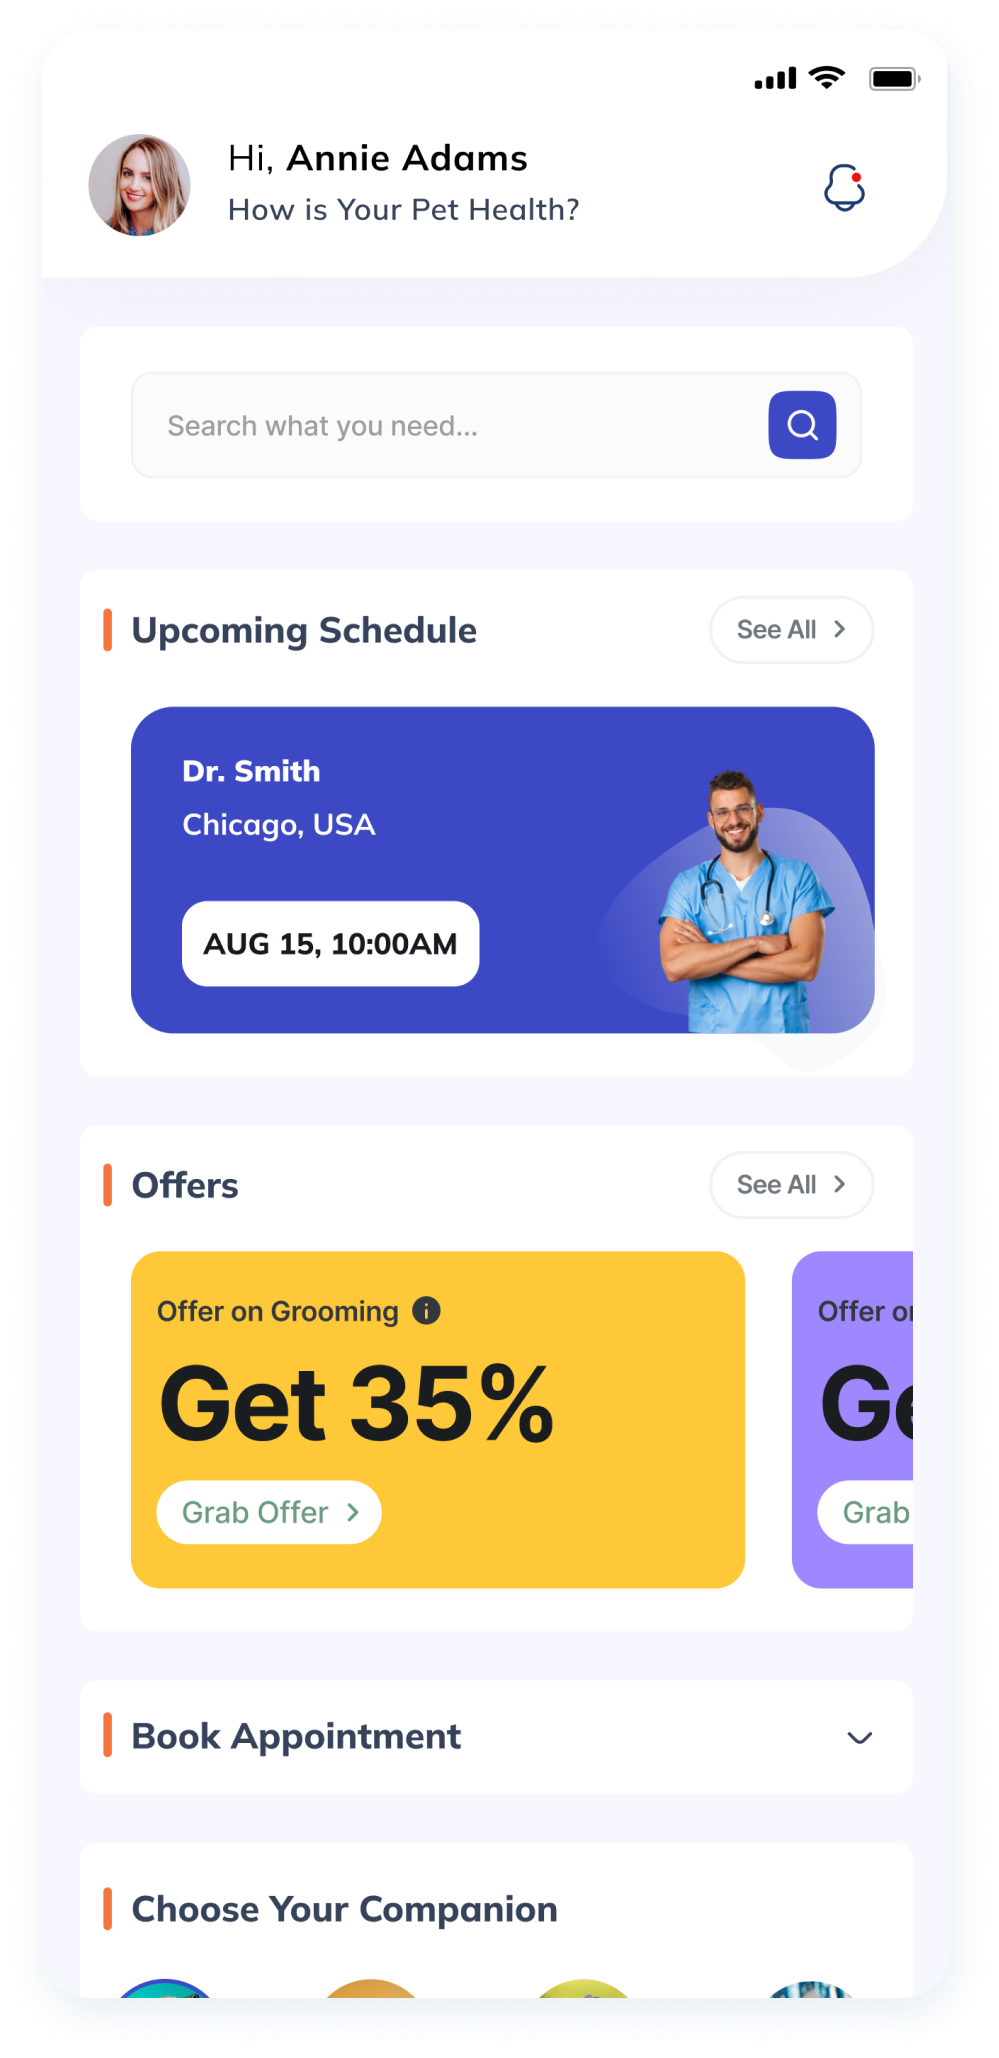  UI design of the VetPet app’s appointment scheduling screen